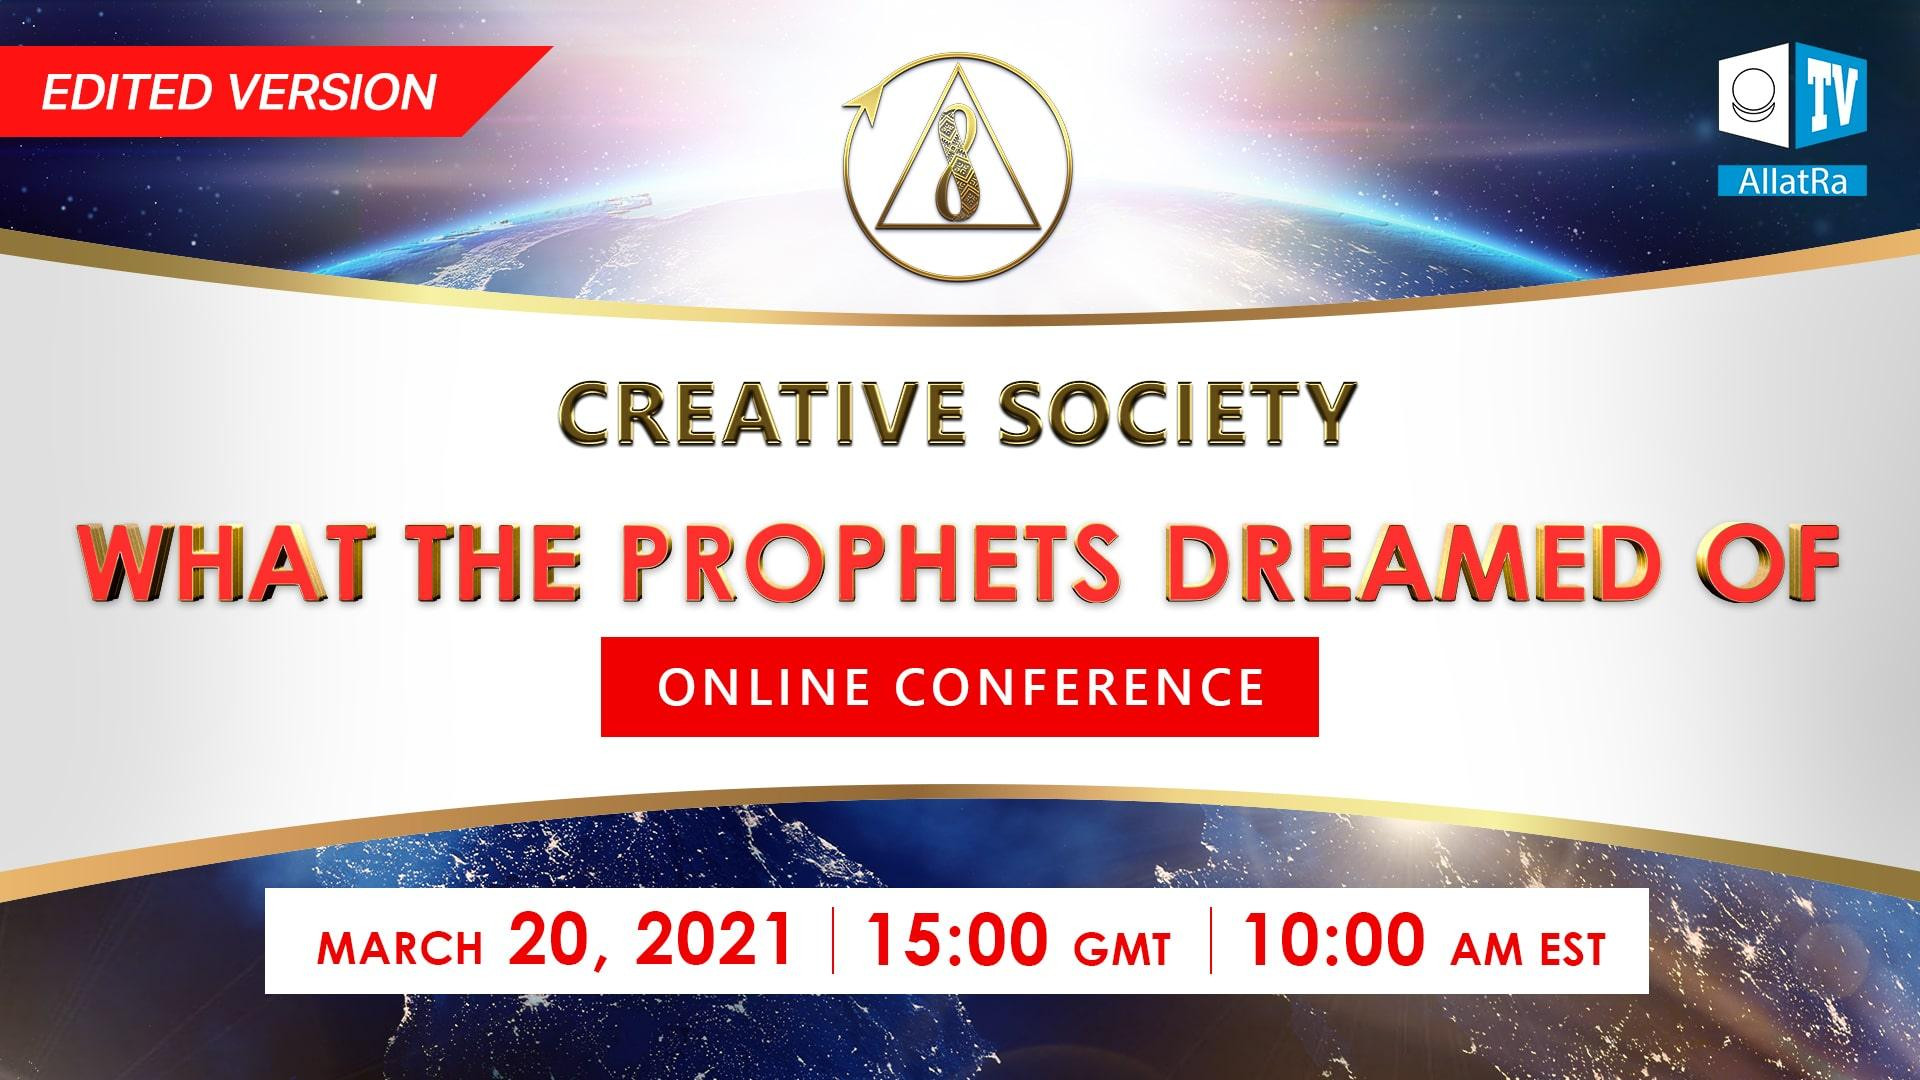 Creative Society. What the prophets dreamed of | International online conference | March 20, 2021 (Edited Version)